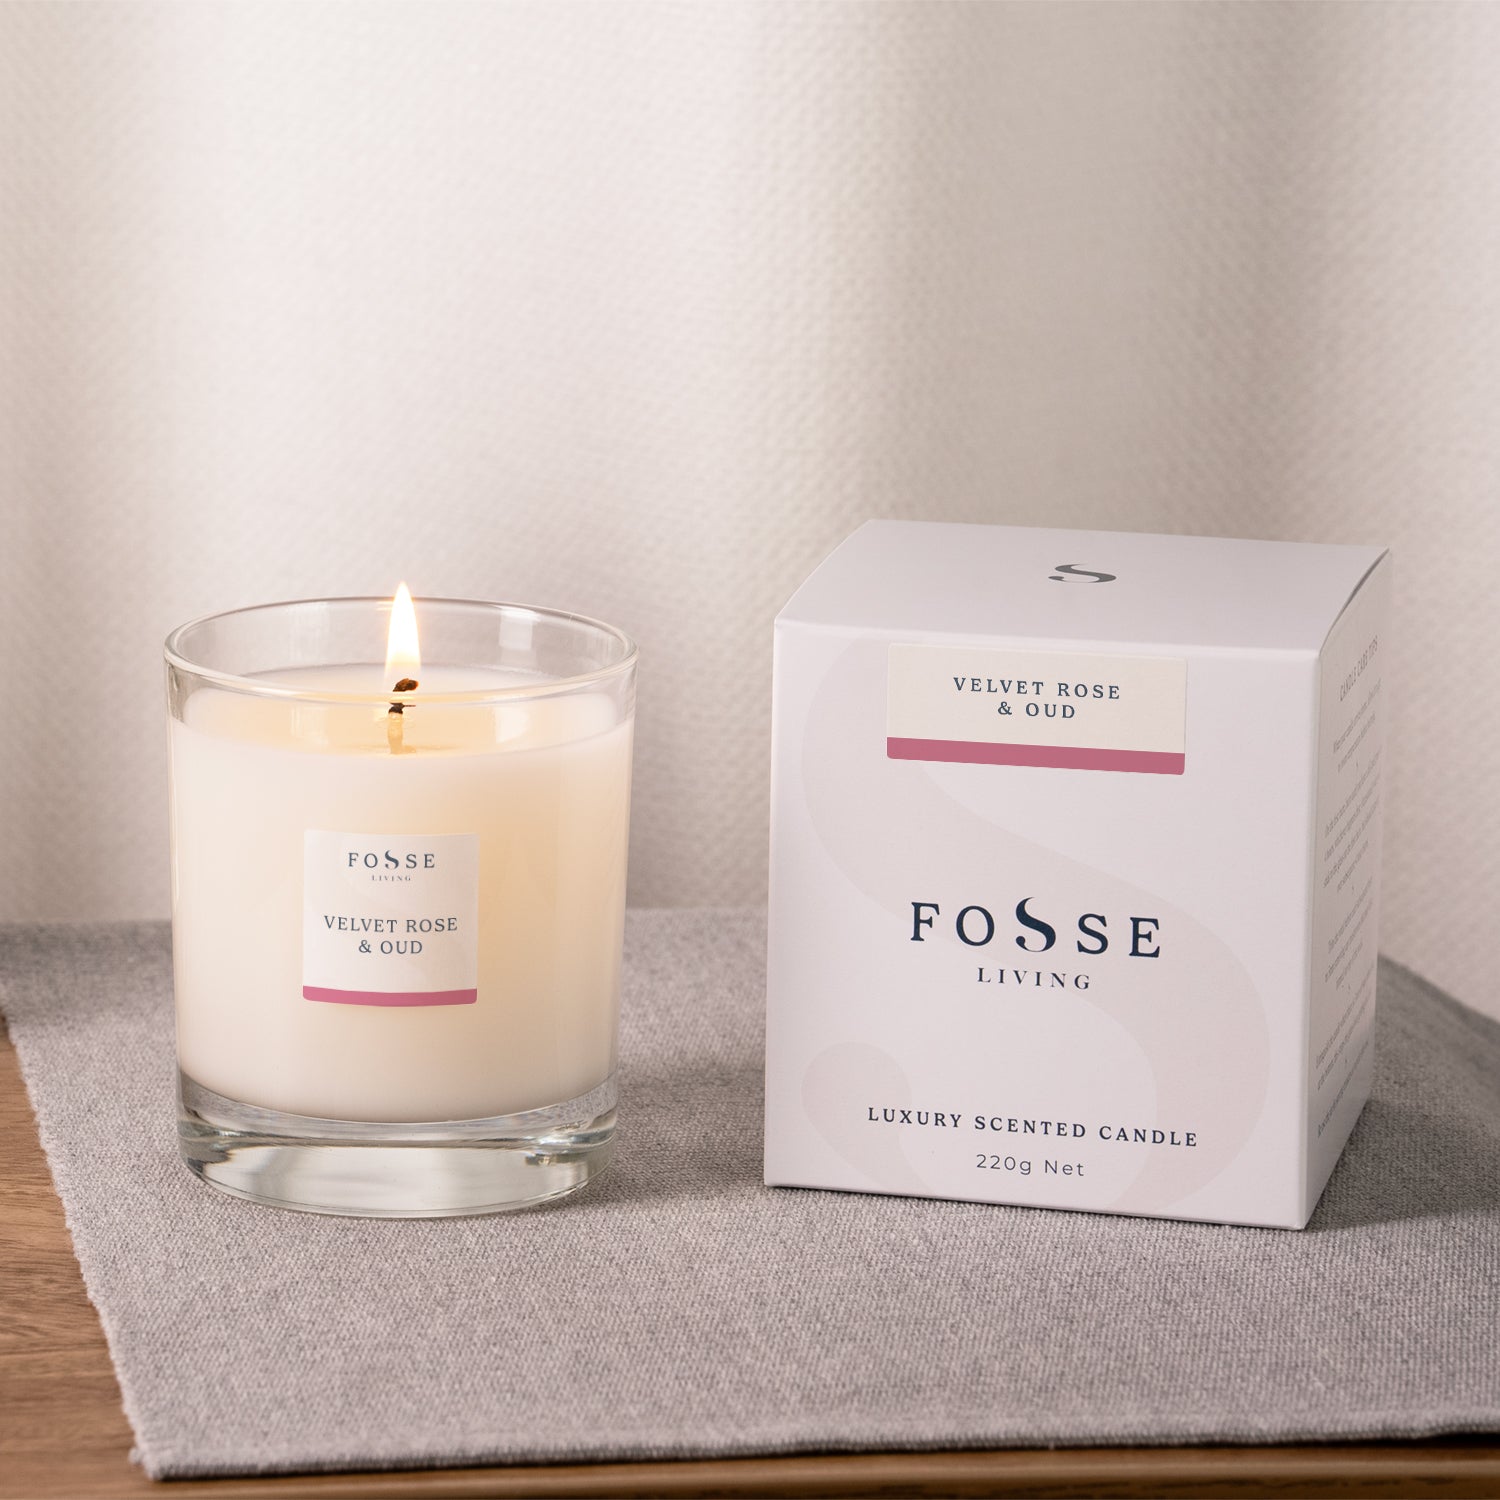 Velvet Rose & Oud Scented Candle - Fosse Living | Luxury Home Fragrances